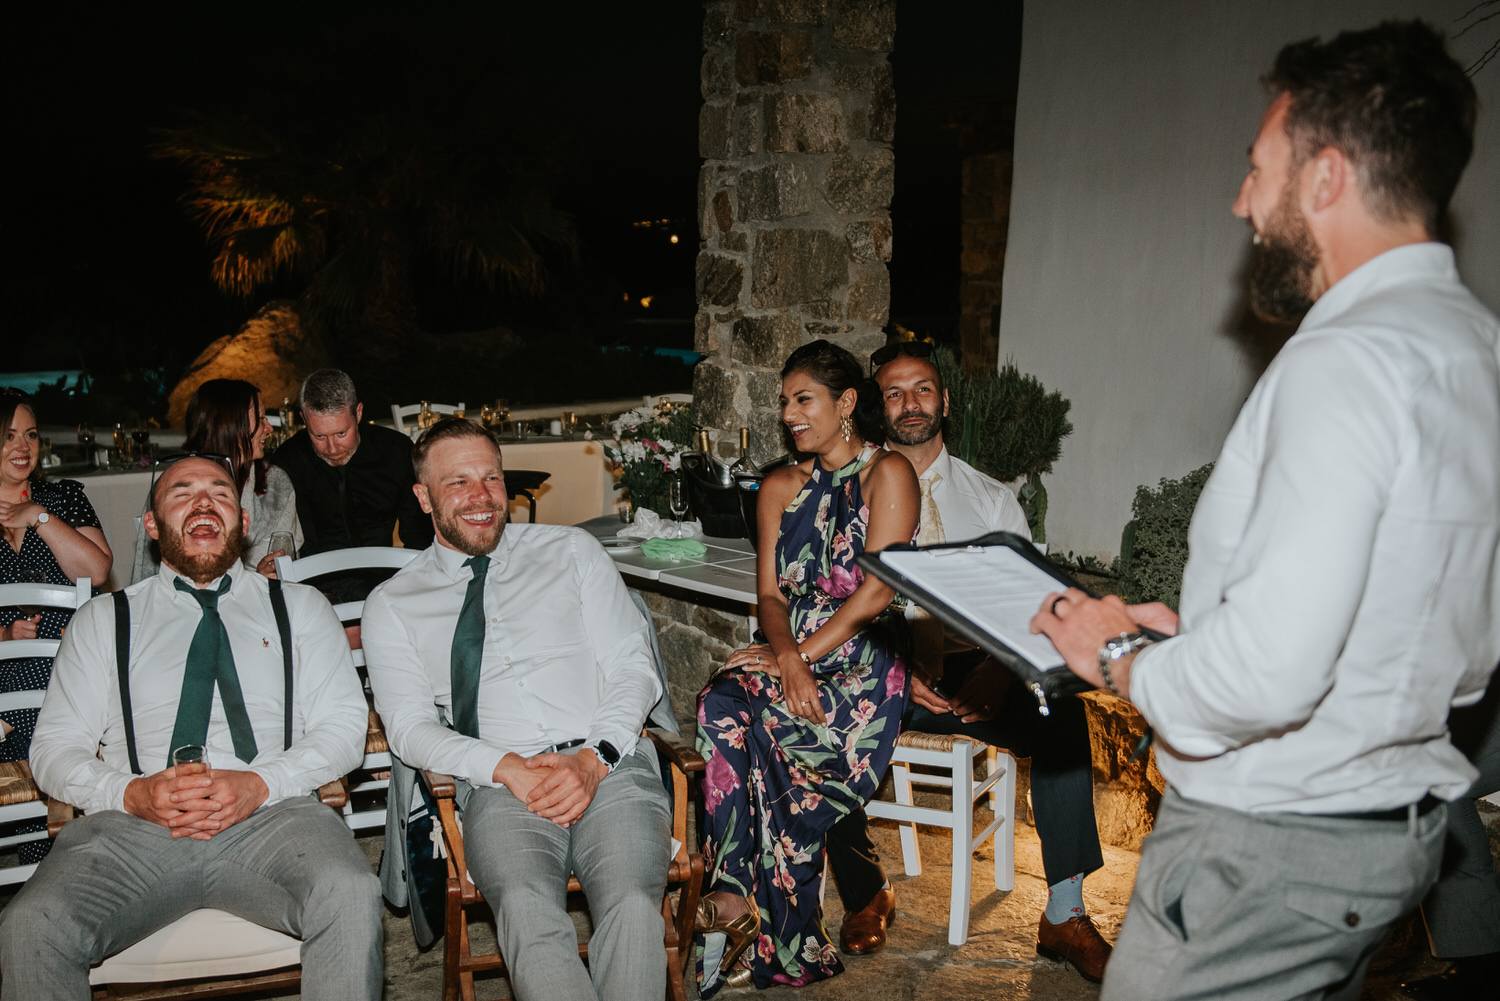 Mykonos wedding photographer: groom and his best men laughing surrounded by guests during his speeches on Mykonos wedding.